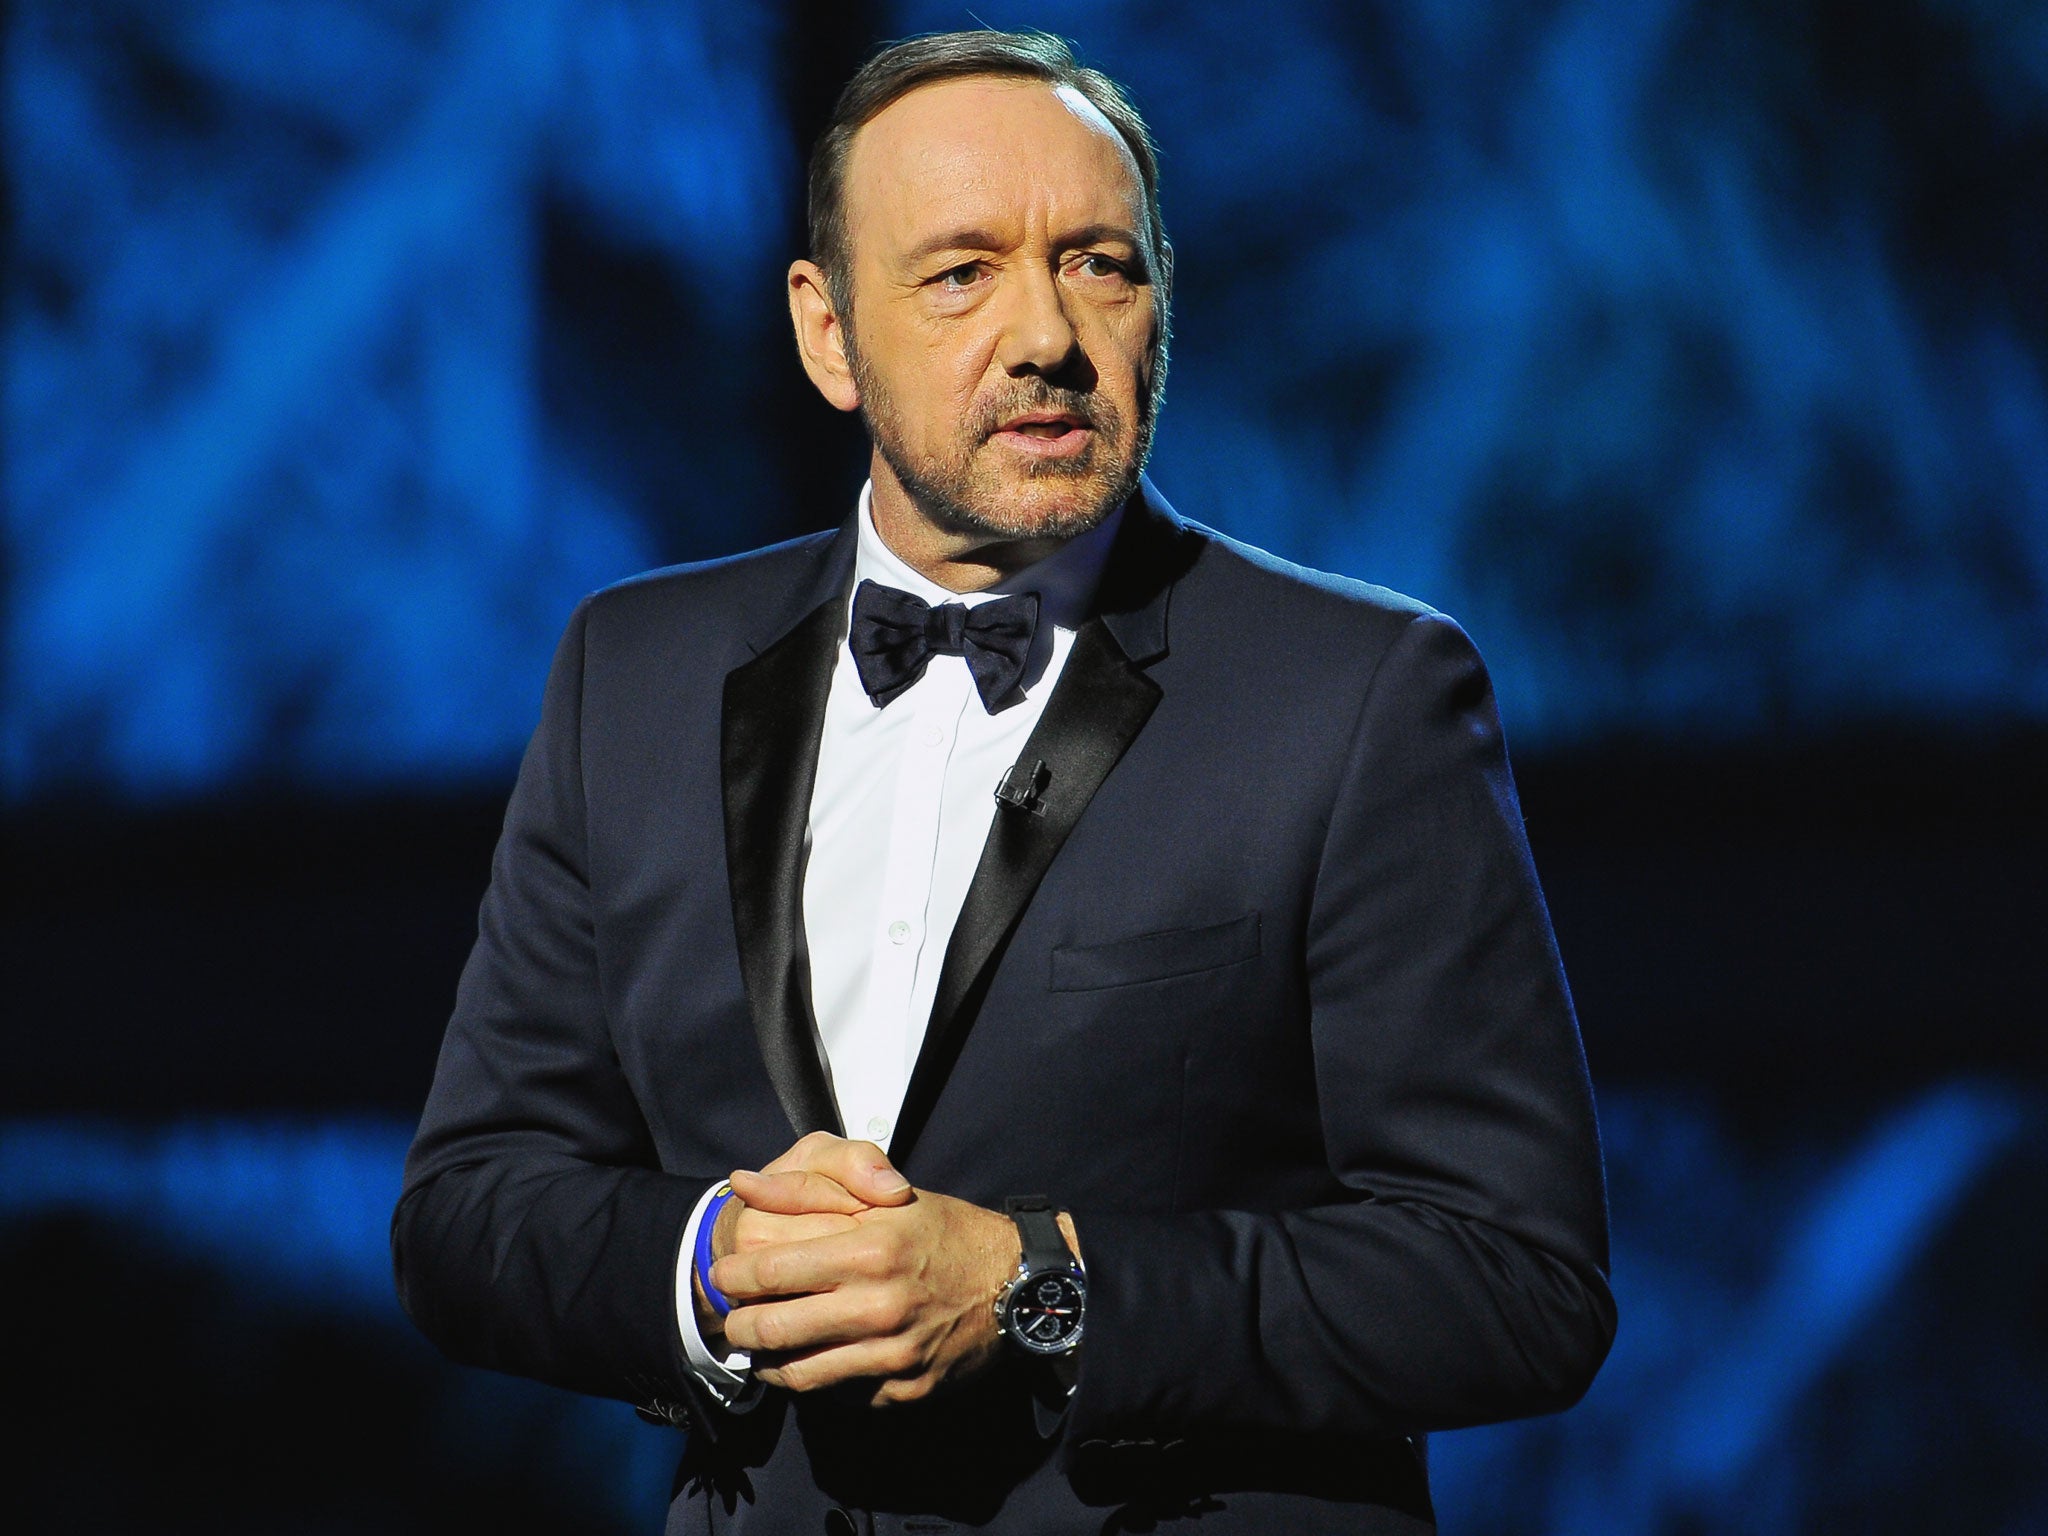 Kevin Spacey pictured hosting the 2014 Breakthrough Prizes Awarded in Fundamental Physics and Life Sciences Ceremony at NASA Ames Research Center on December 12, 2013 in Mountain View, California.